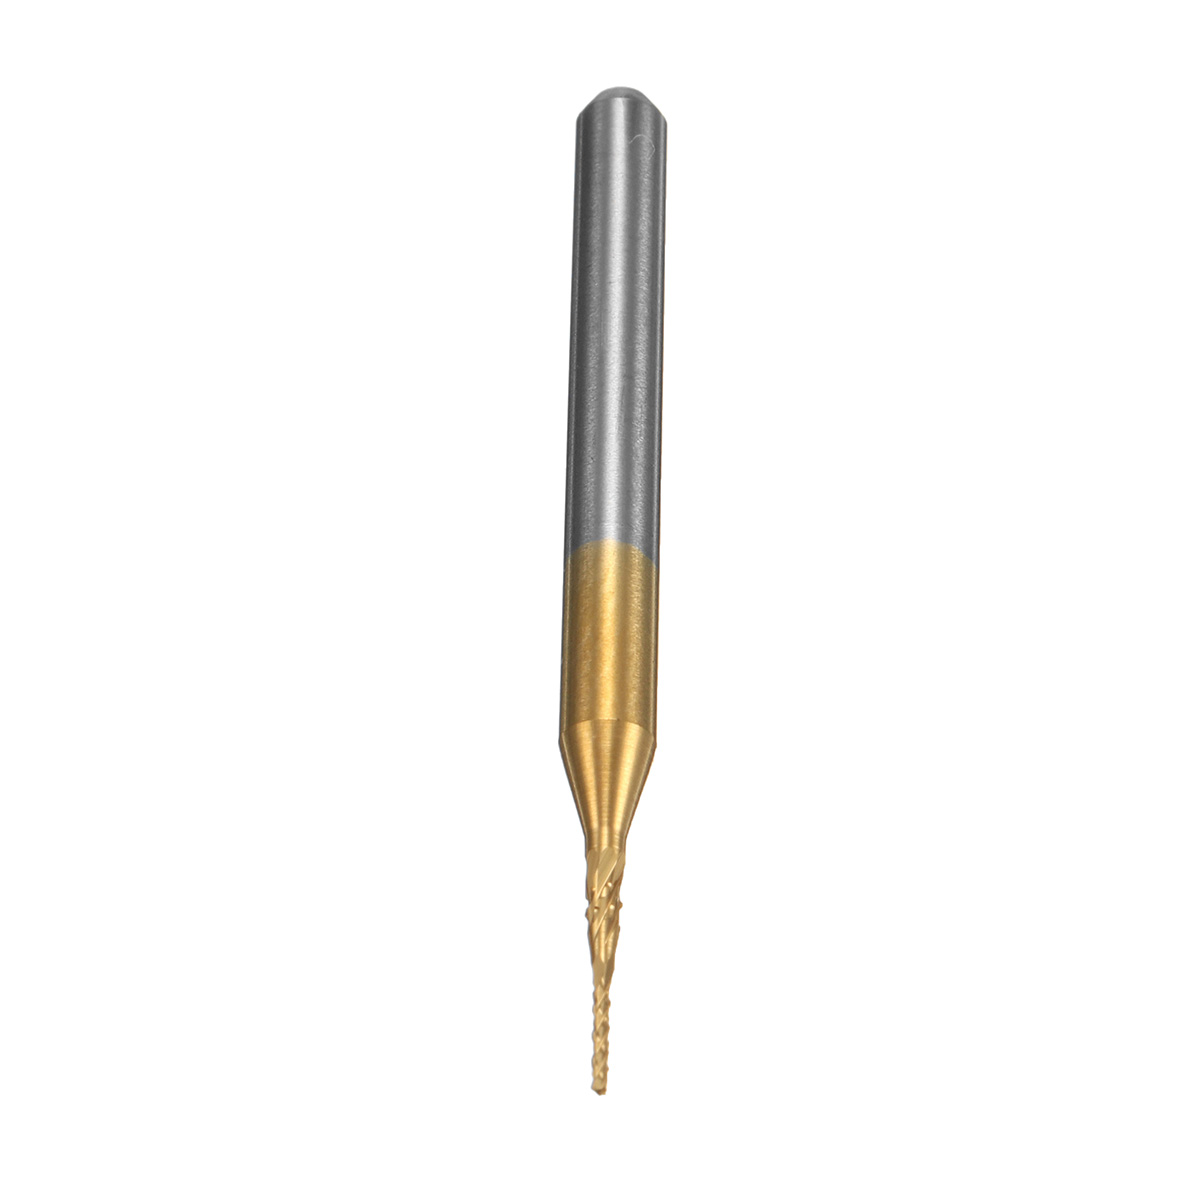 Drillpro-10pcs-08mm-Titanium-Coated-Engraving-Milling-Cutter-Carbide-End-Mill-Rotary-Burr-1531799-5